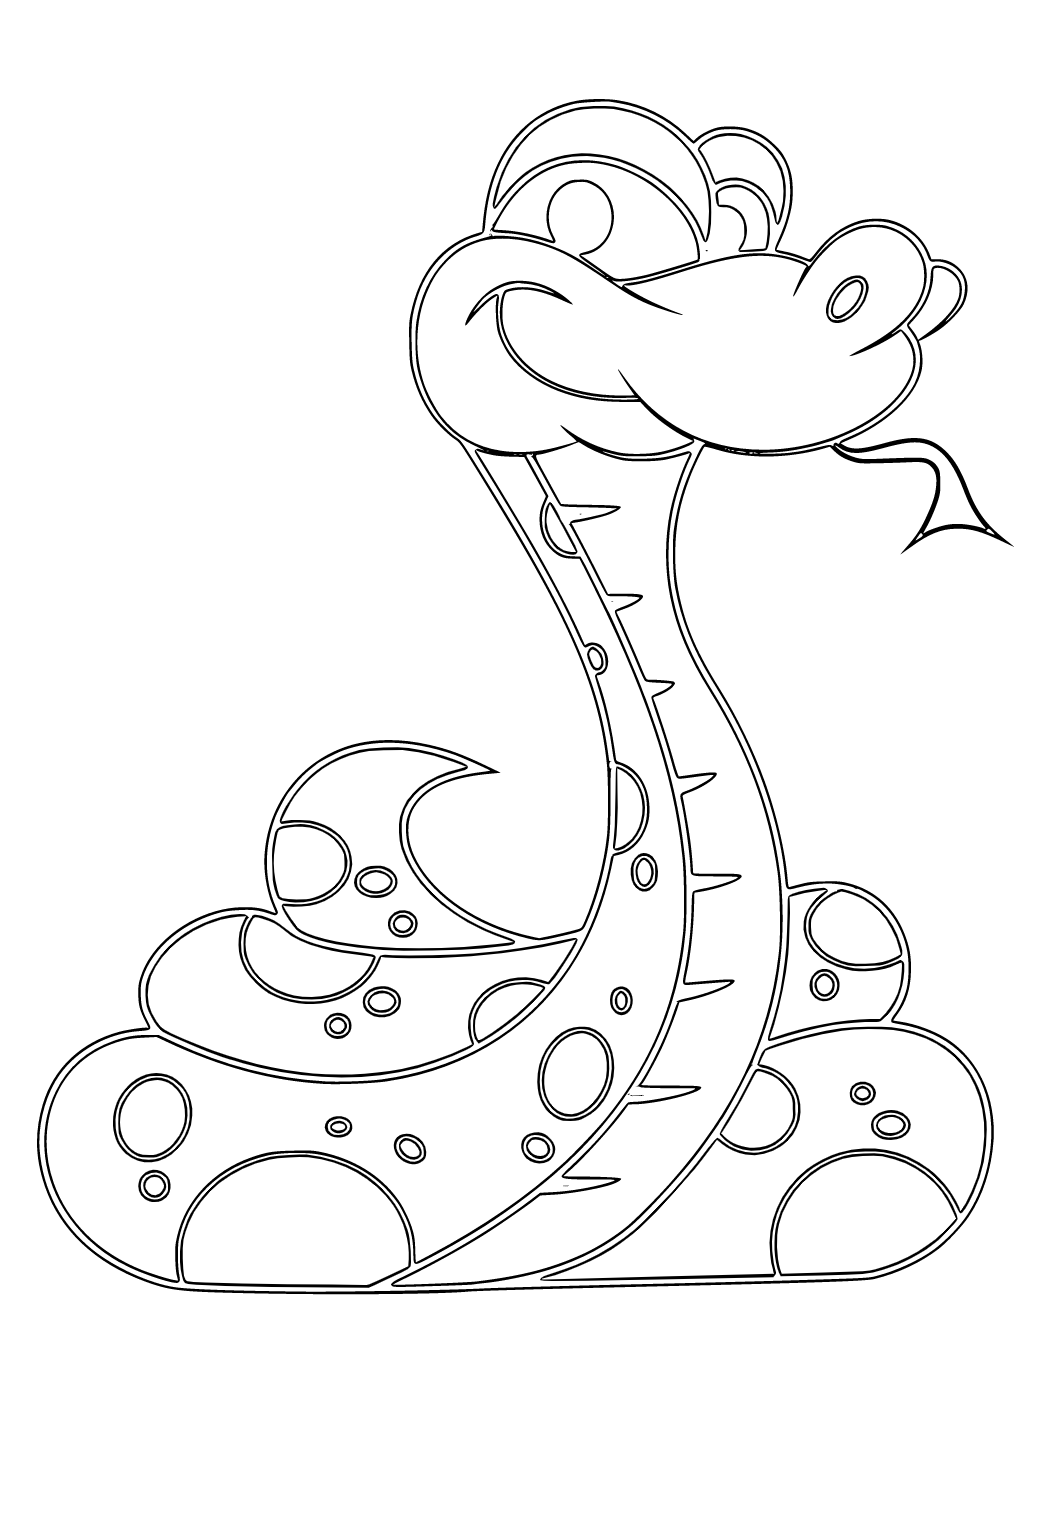 Free printable snake smile coloring page for adults and kids